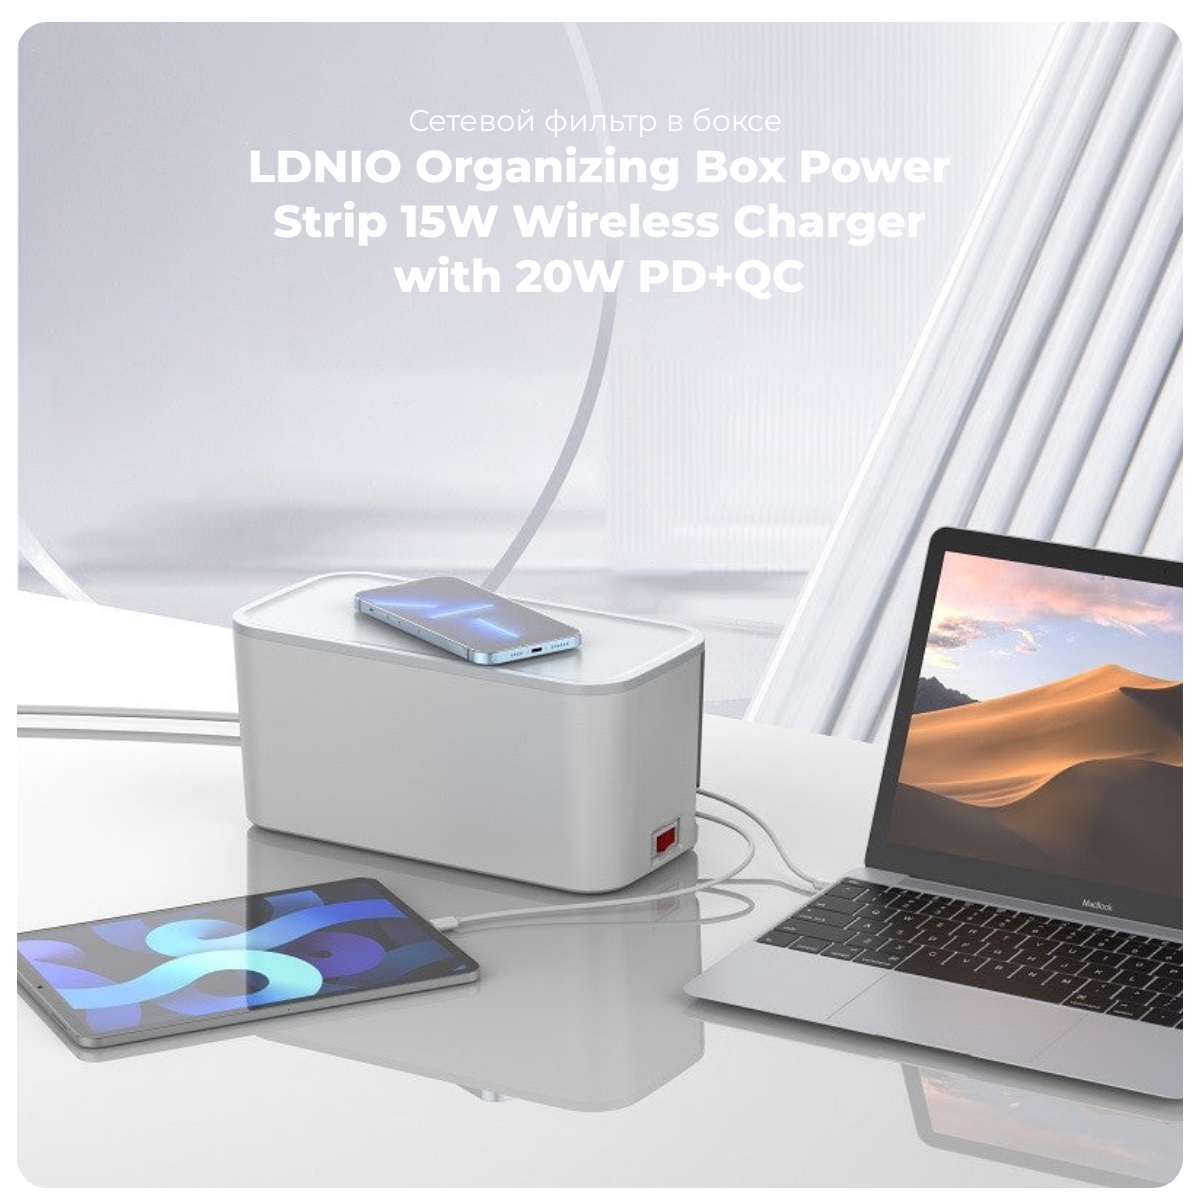 LDNIO-Organizing-Box-Power-Strip-15W-Wireless-Charger-with-20W-PD-QC-01